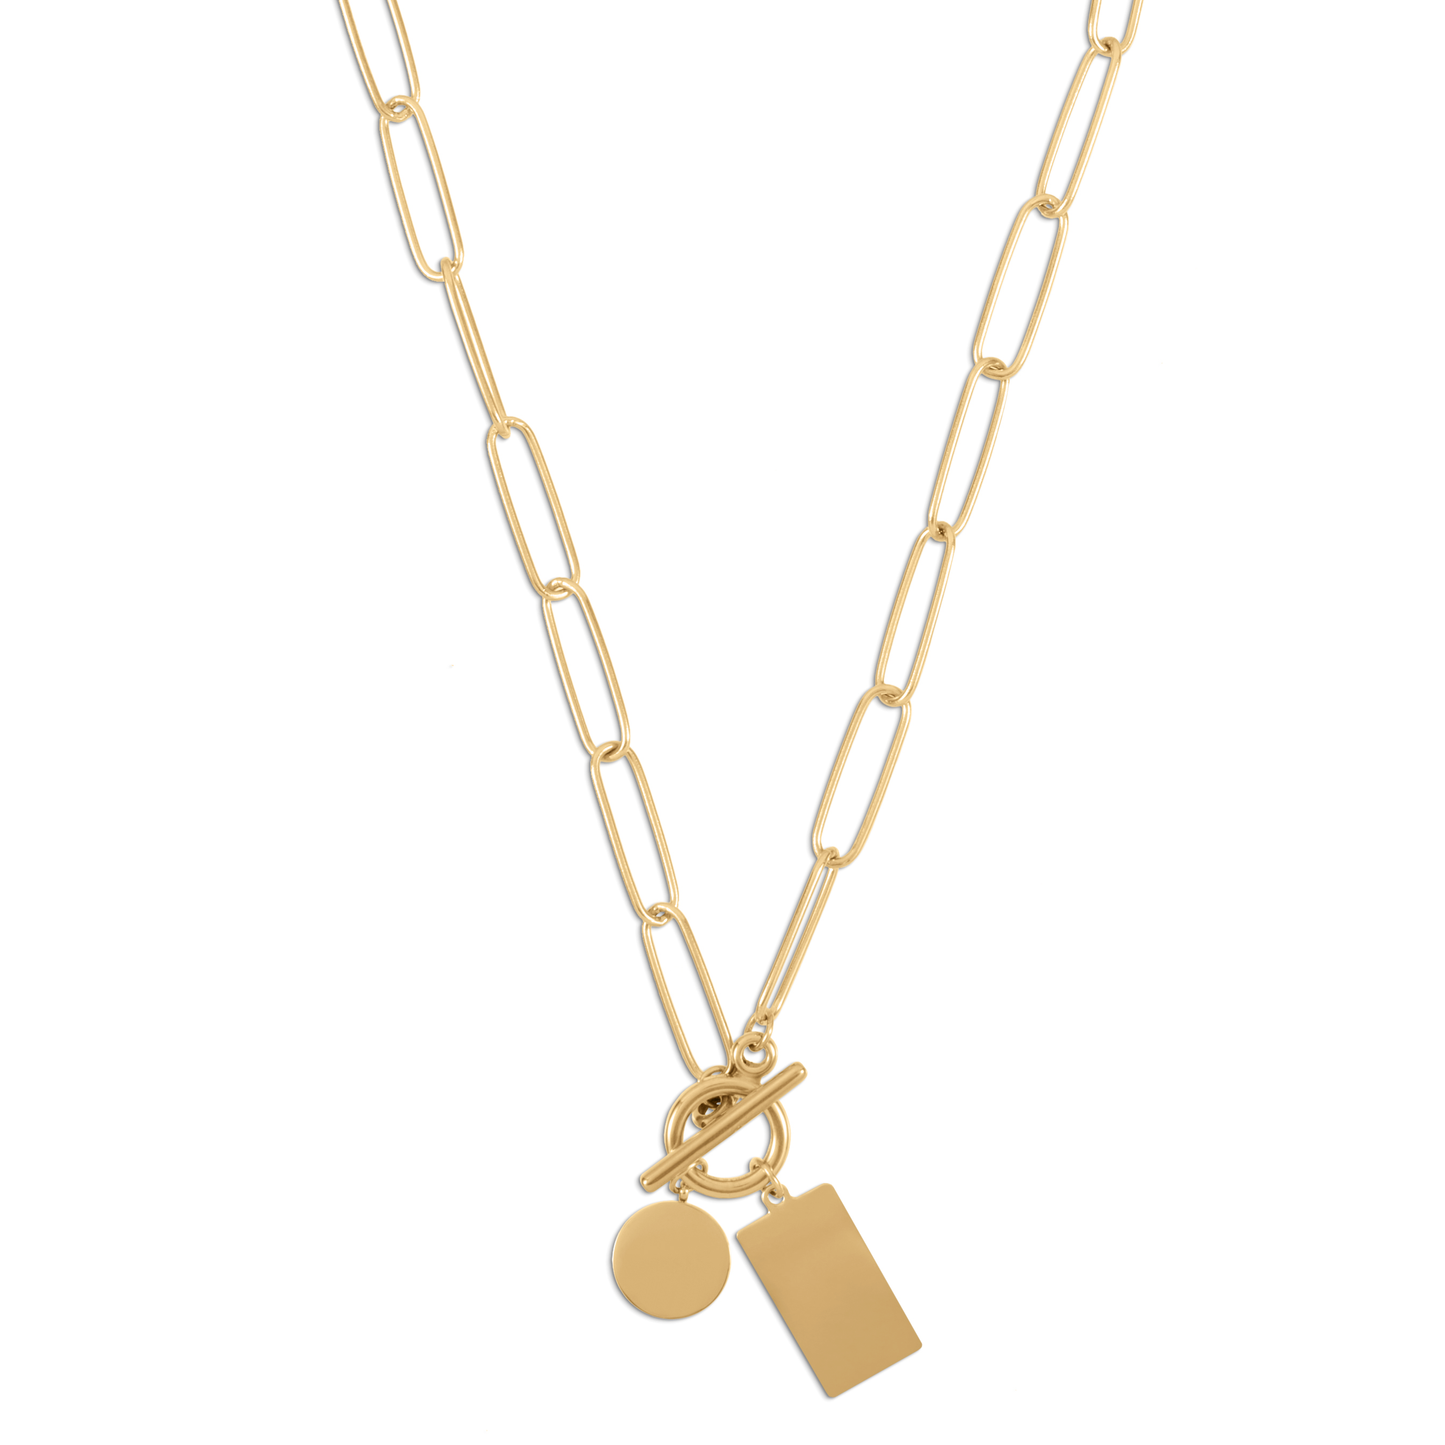 Ellie Vail - Kaylee Toggle Charm Necklace